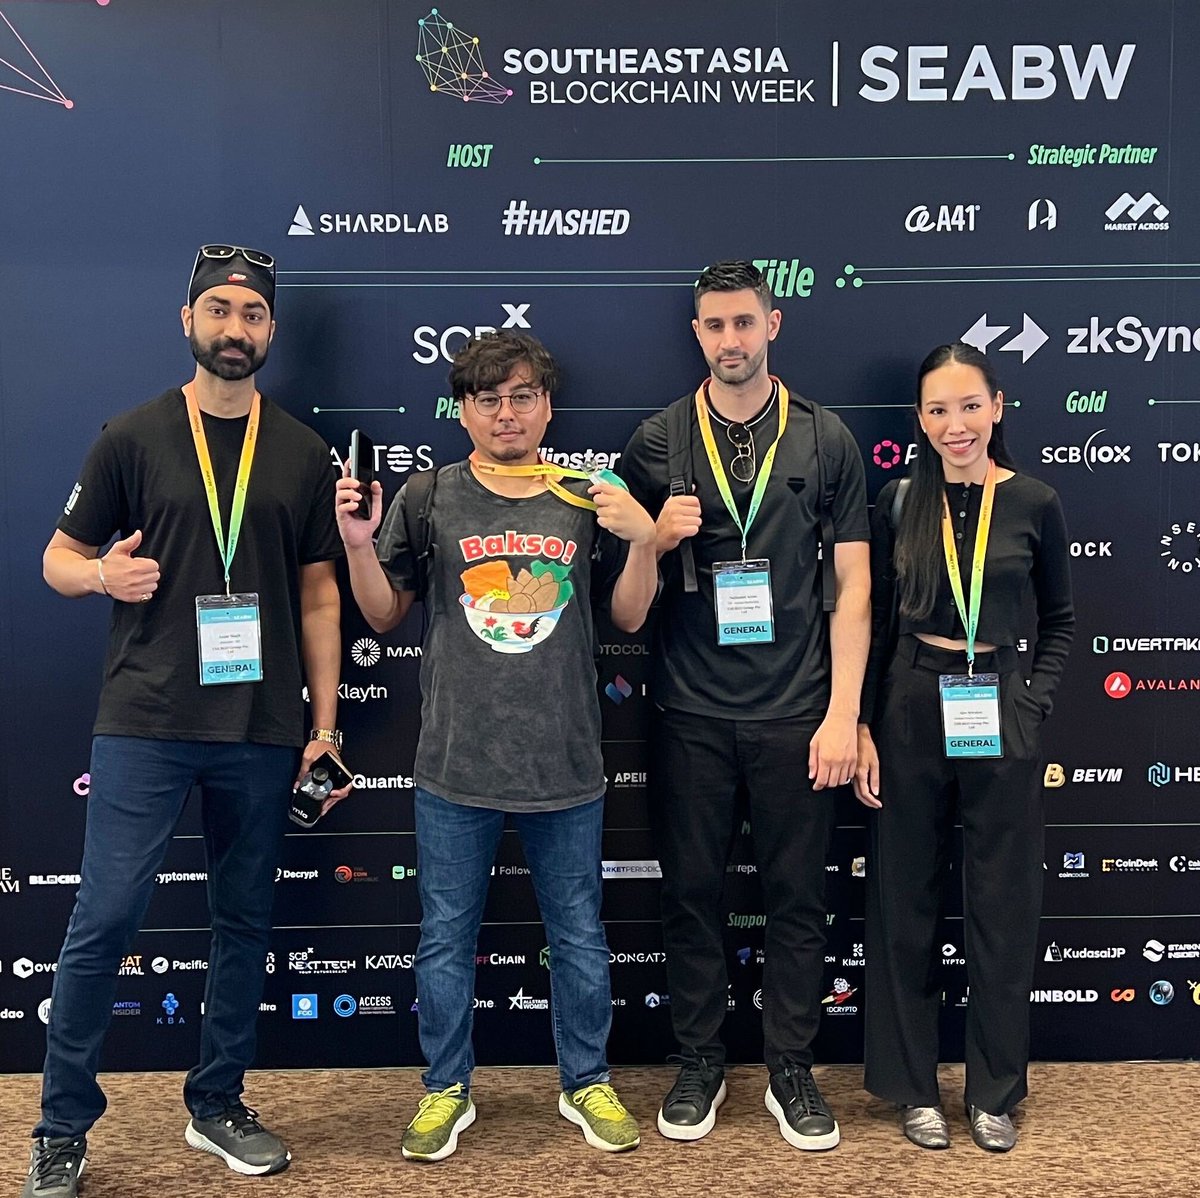 EMURGO had a fantastic time at the South East Asian Blockchain Week in Bangkok. 🇹🇭 It’s great to see the Thailand crypto community grow with many global partners embracing the market this year including a strong Cardano community. 🚀 @nateacton @encrypt2 @AireInv @SEABWOfficial